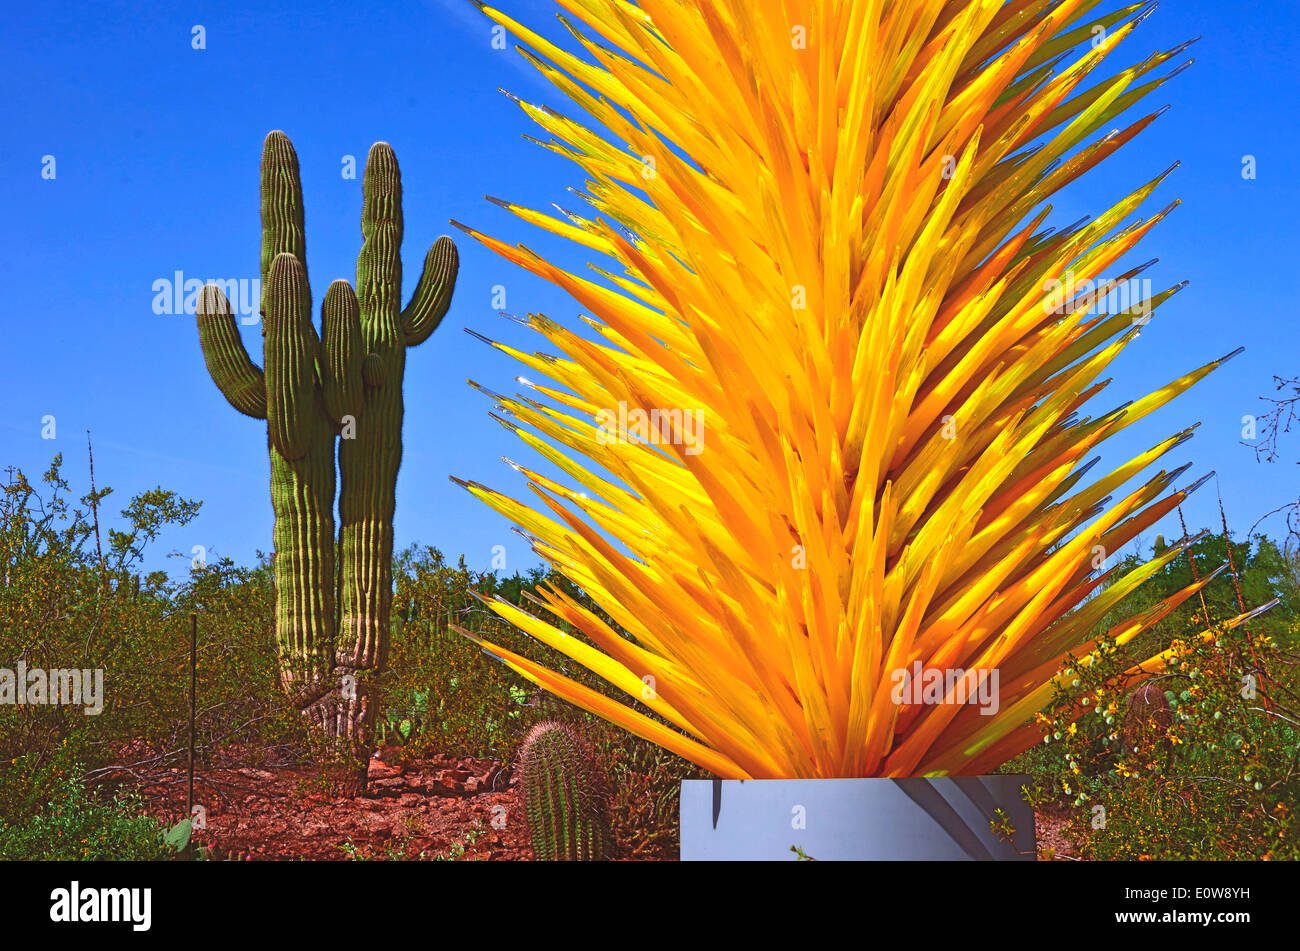 The legendary glass artist Dale Chihuly exhibited his work at The Desert Botanical Gardens in Phoenix, Arizona, USA during 2014. Stock Photo